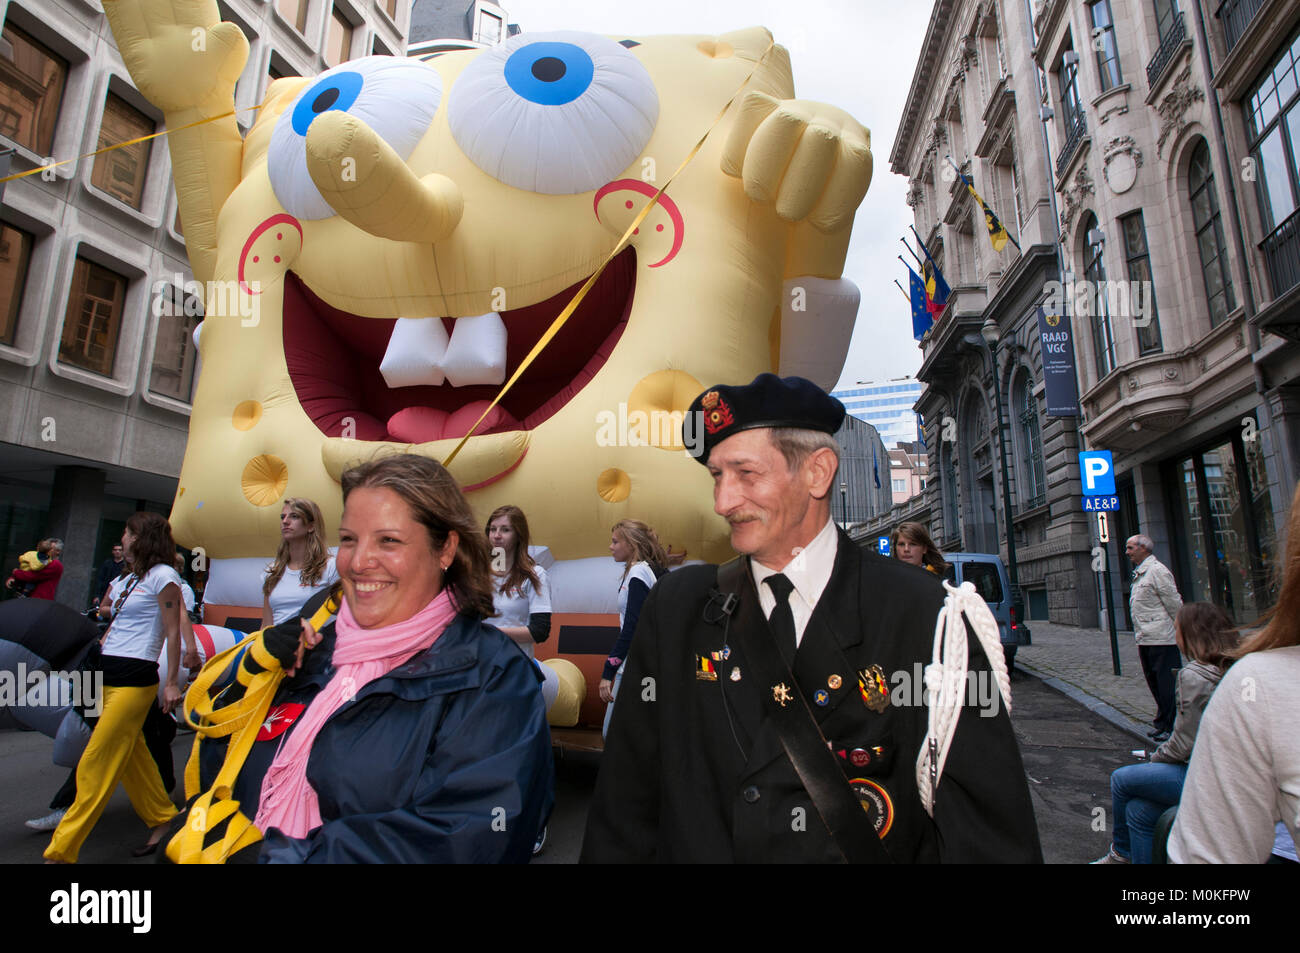 Balloon's Day Parade, Brussels, Belgium. An inflatable of Belgian comics series character Spirou collapsed as paraded during the Balloon's Day Parade  Stock Photo